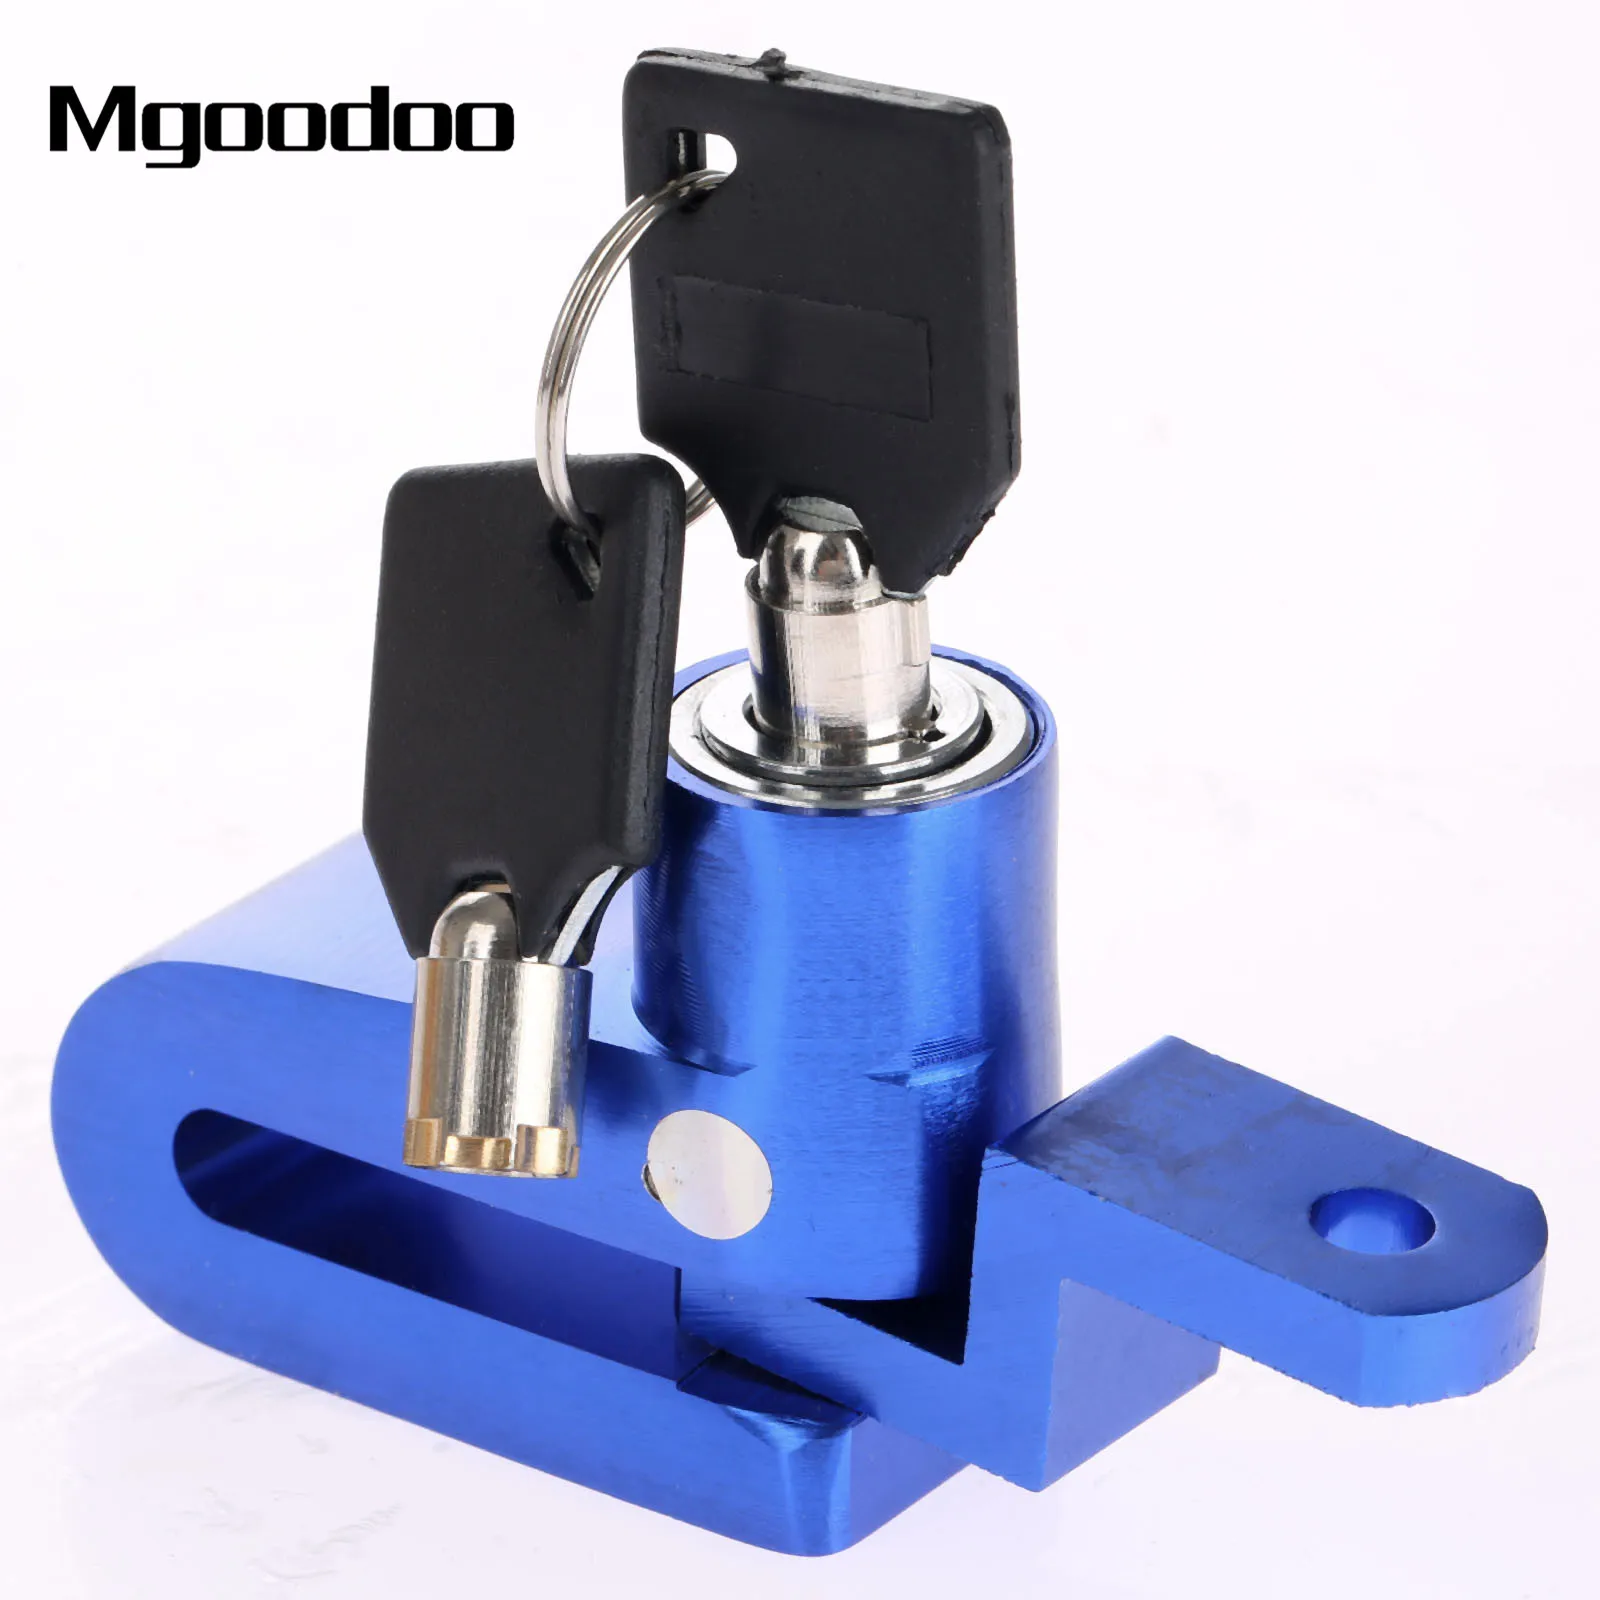 electric bicycle alloy oil hydraulic bicycle disc brake Mgoodoo Motorcycle Bike Bicycle Disc Disk Brake Lock Security Anti-theft Alarm Lock Stainless Alloy Motor Bike Theft Protection